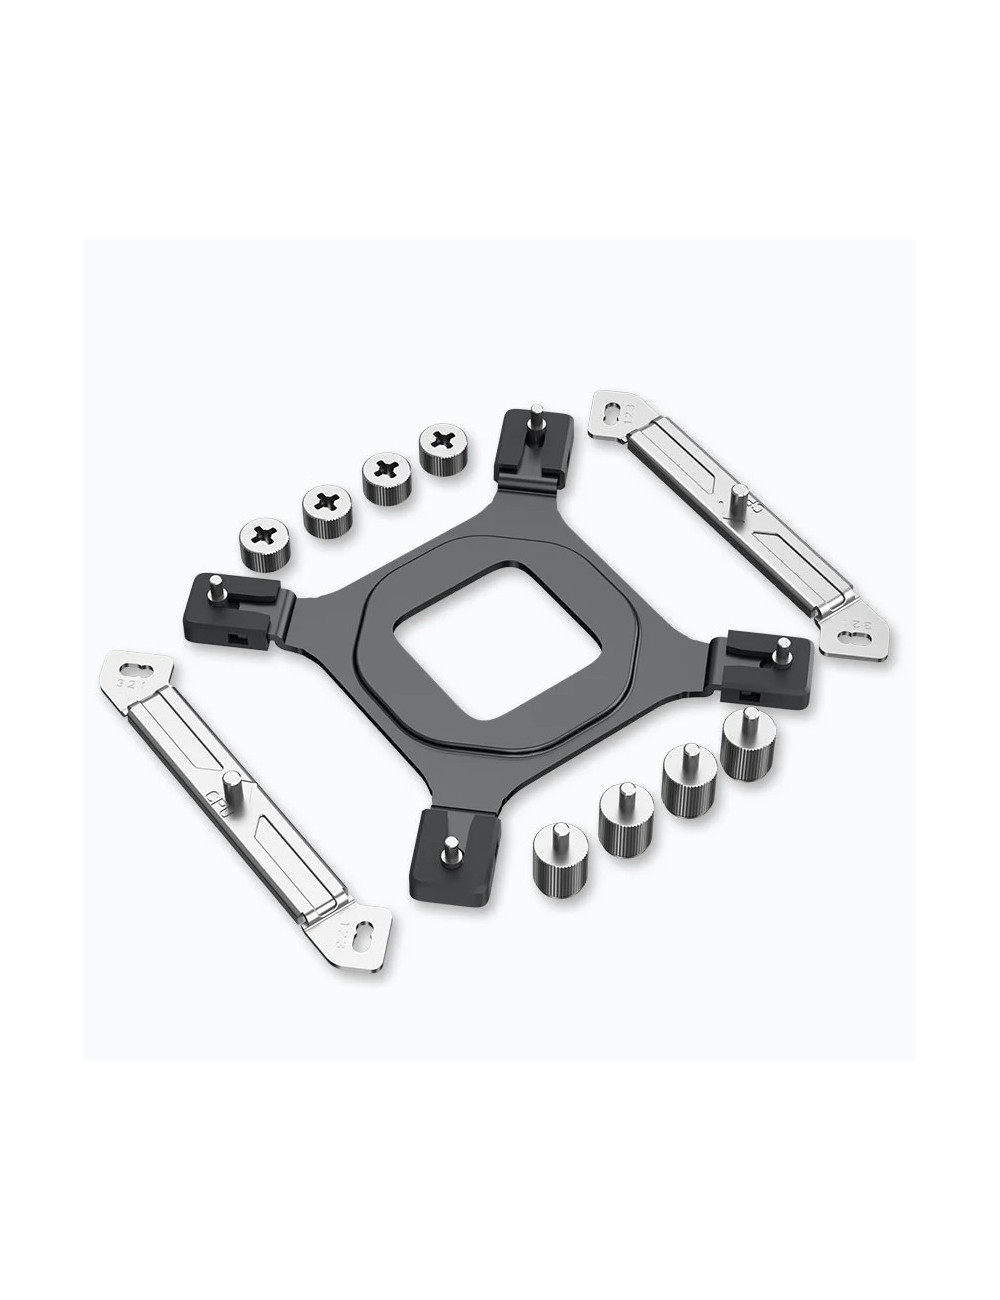 DeepCool Mounting Upgrades For CASTLE/GAMMAXX Liquid Coolers Deepcool Mounting Upgrades For CASTLE/GAMMAXX Liquid Coolers EM172-